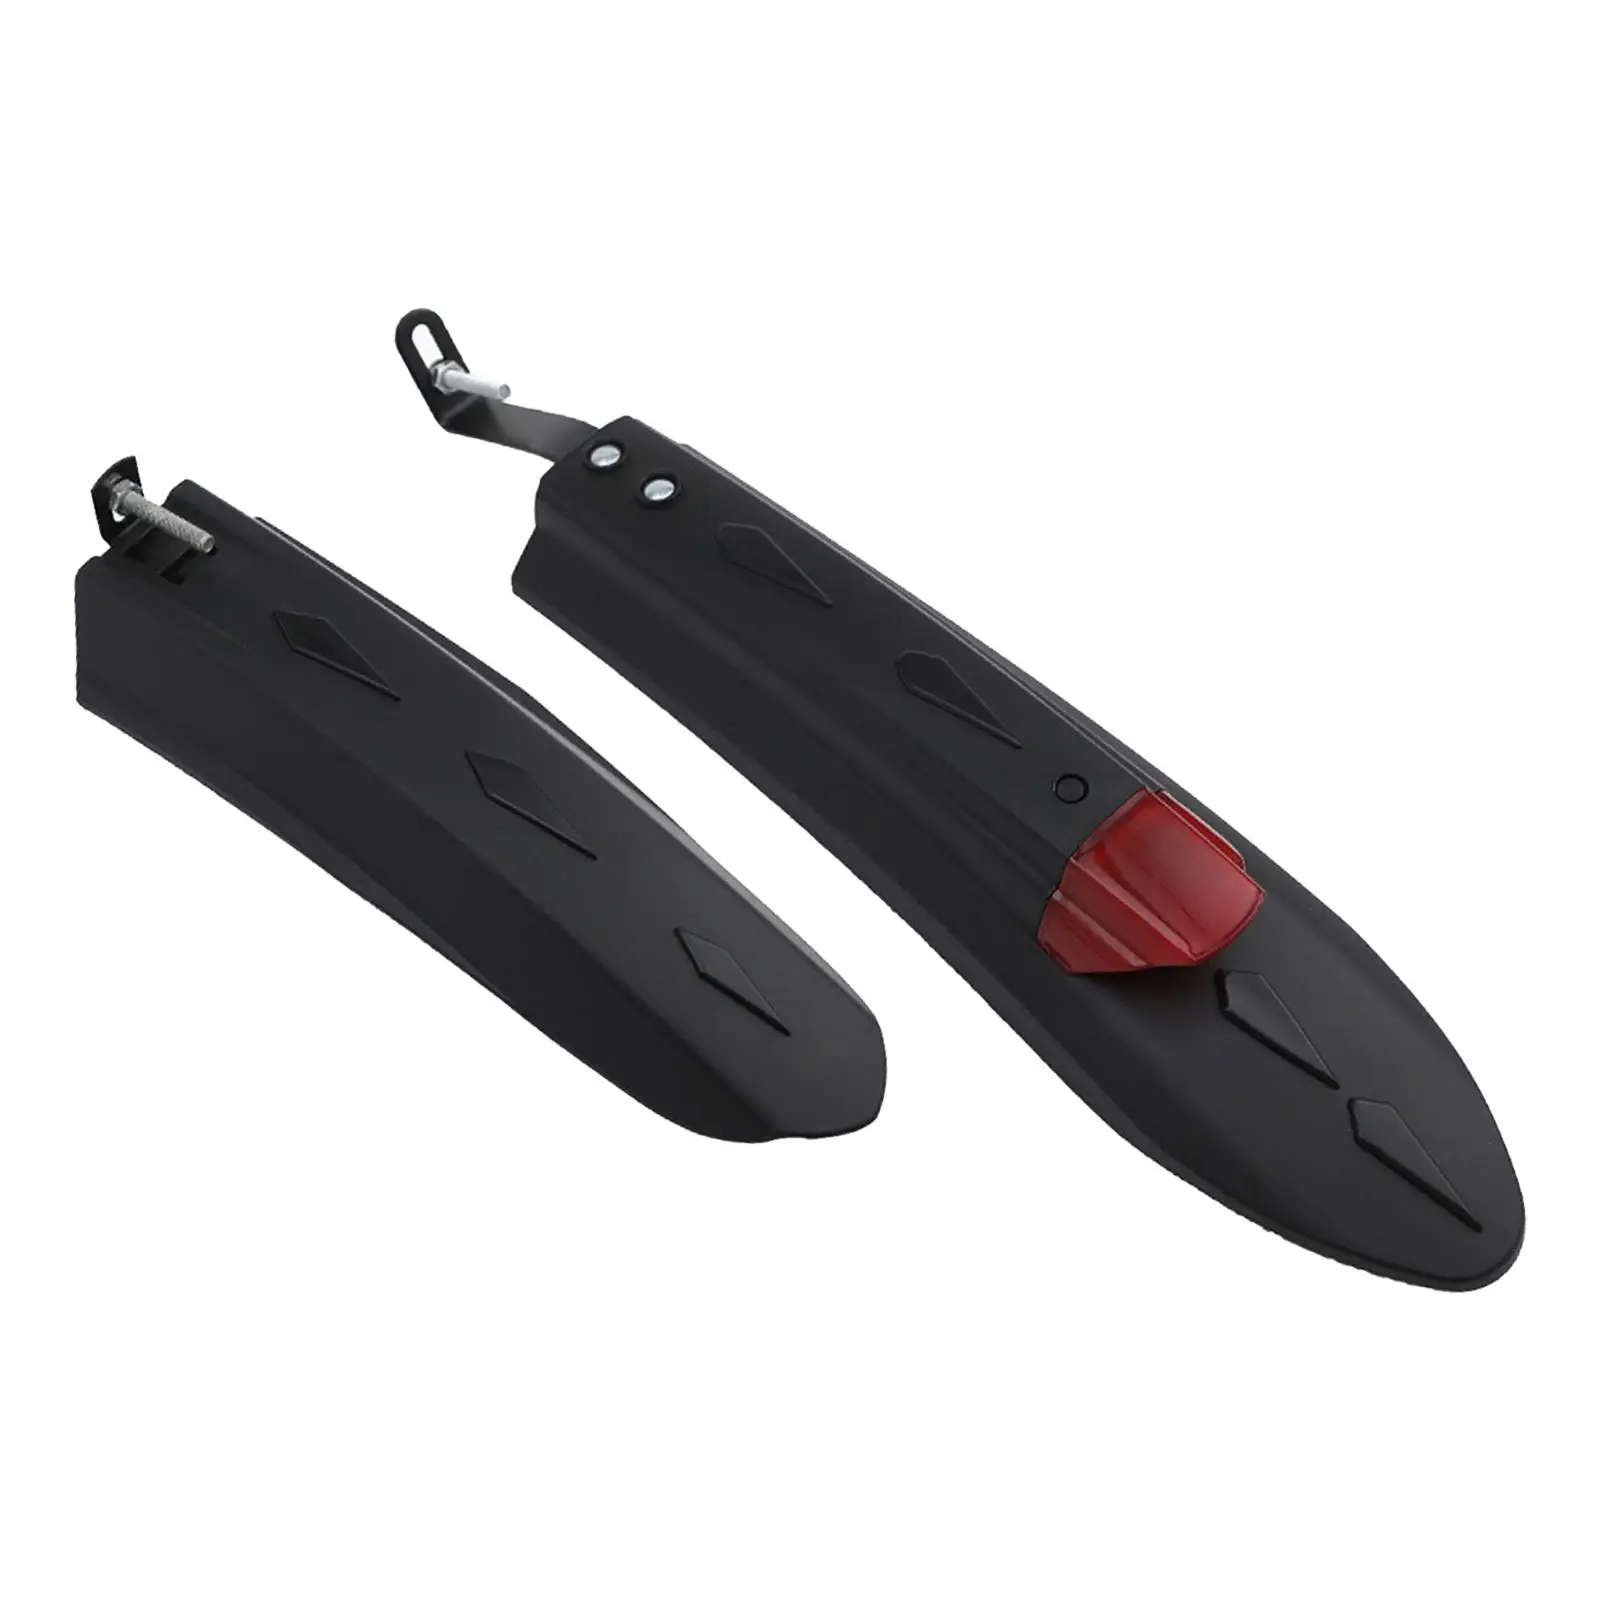 Bike Mudguard Front Rear Set, Bike Fenders Front Rear Set Easy Installation Universal Portable Bicycle Mud Guard for Riding